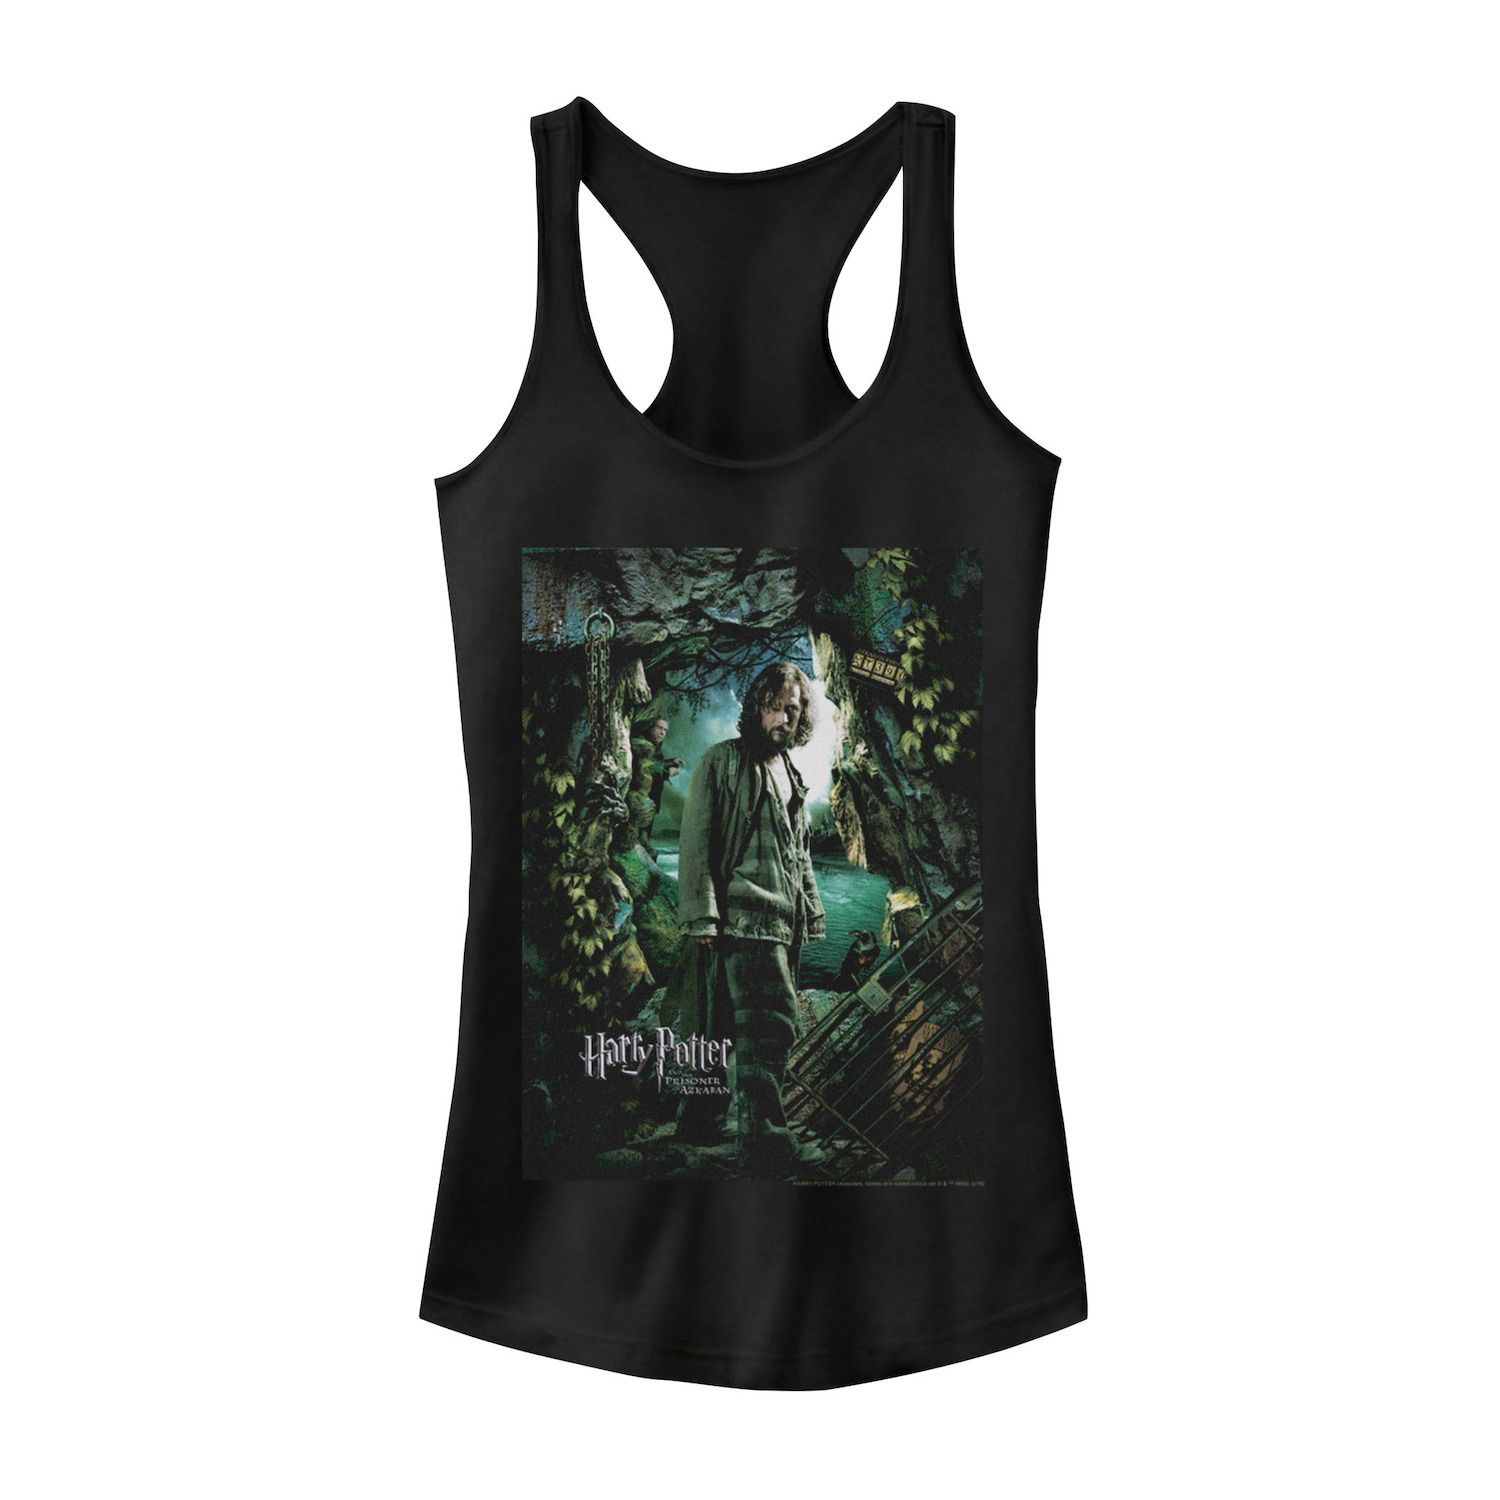 Image for Harry Potter Juniors' and the Prisoner of Azkaban Sirius Black Graphic Tank at Kohl's.